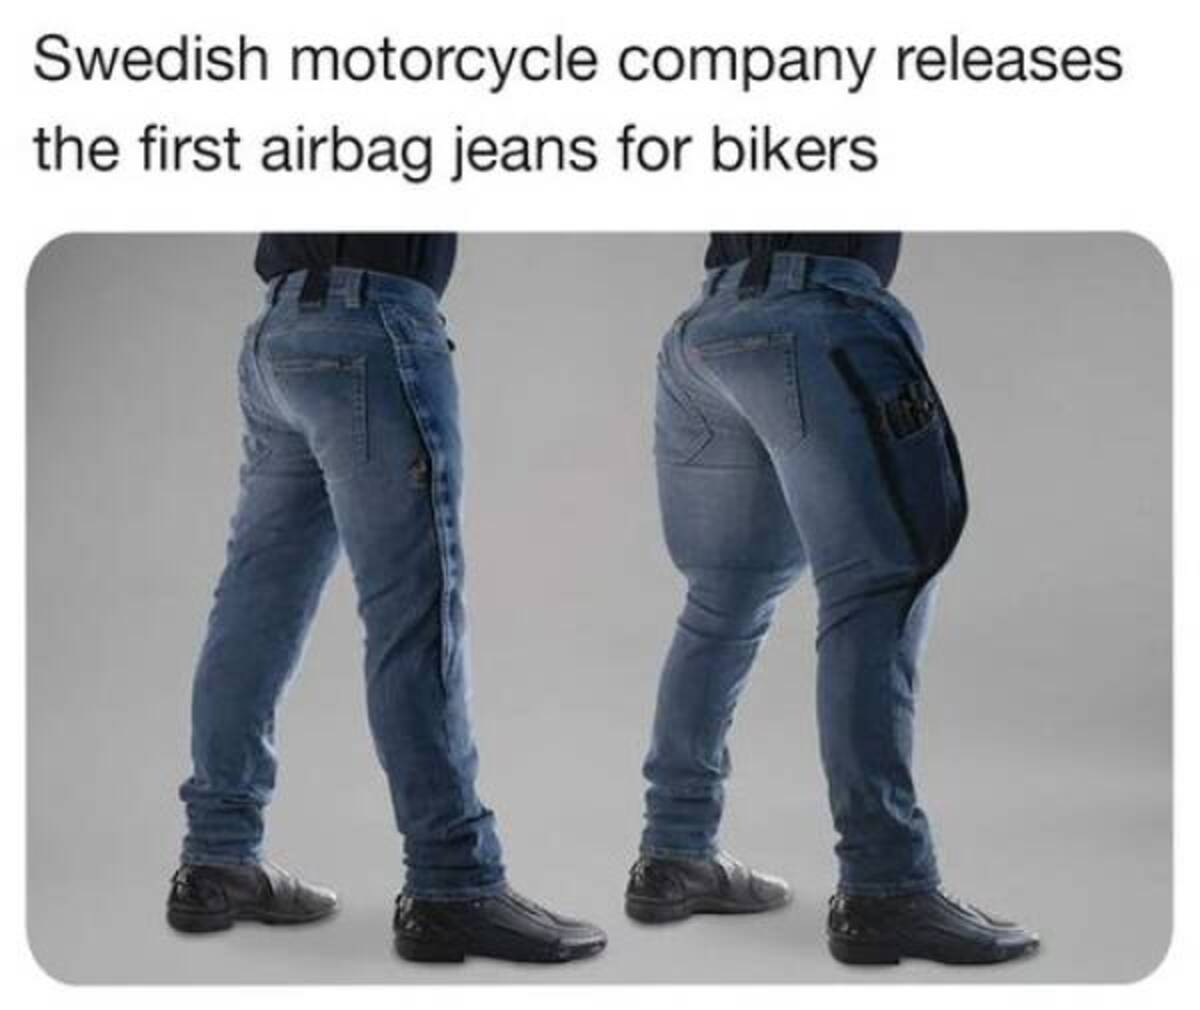 airbags for hips - Swedish motorcycle company releases the first airbag jeans for bikers